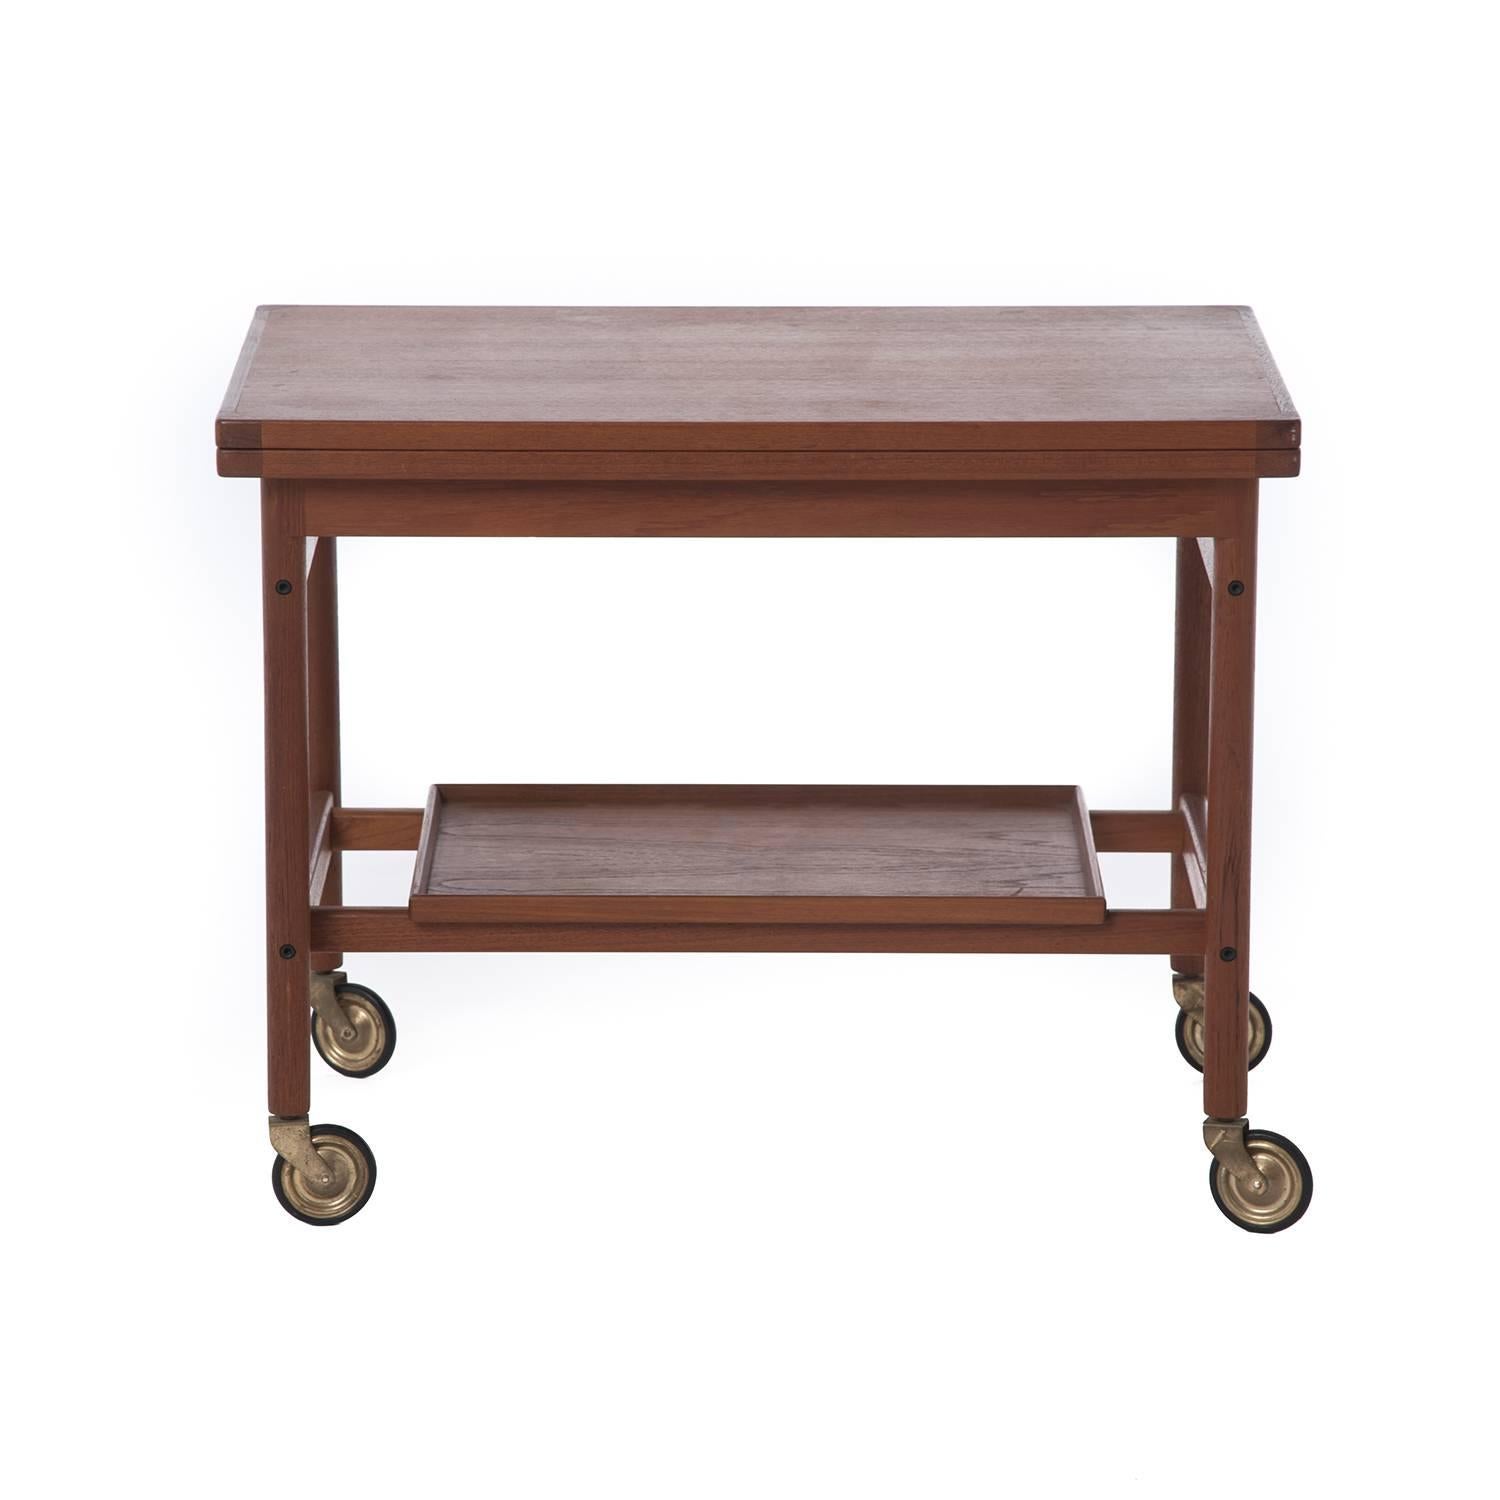 Mid-Century teak Danish bar cart with removable bottom tray and sliding flip-top. The top slides to one side and expands to twice the size, featuring a black laminate on the inner surface conveniently suited for barware. Rolling and portable design